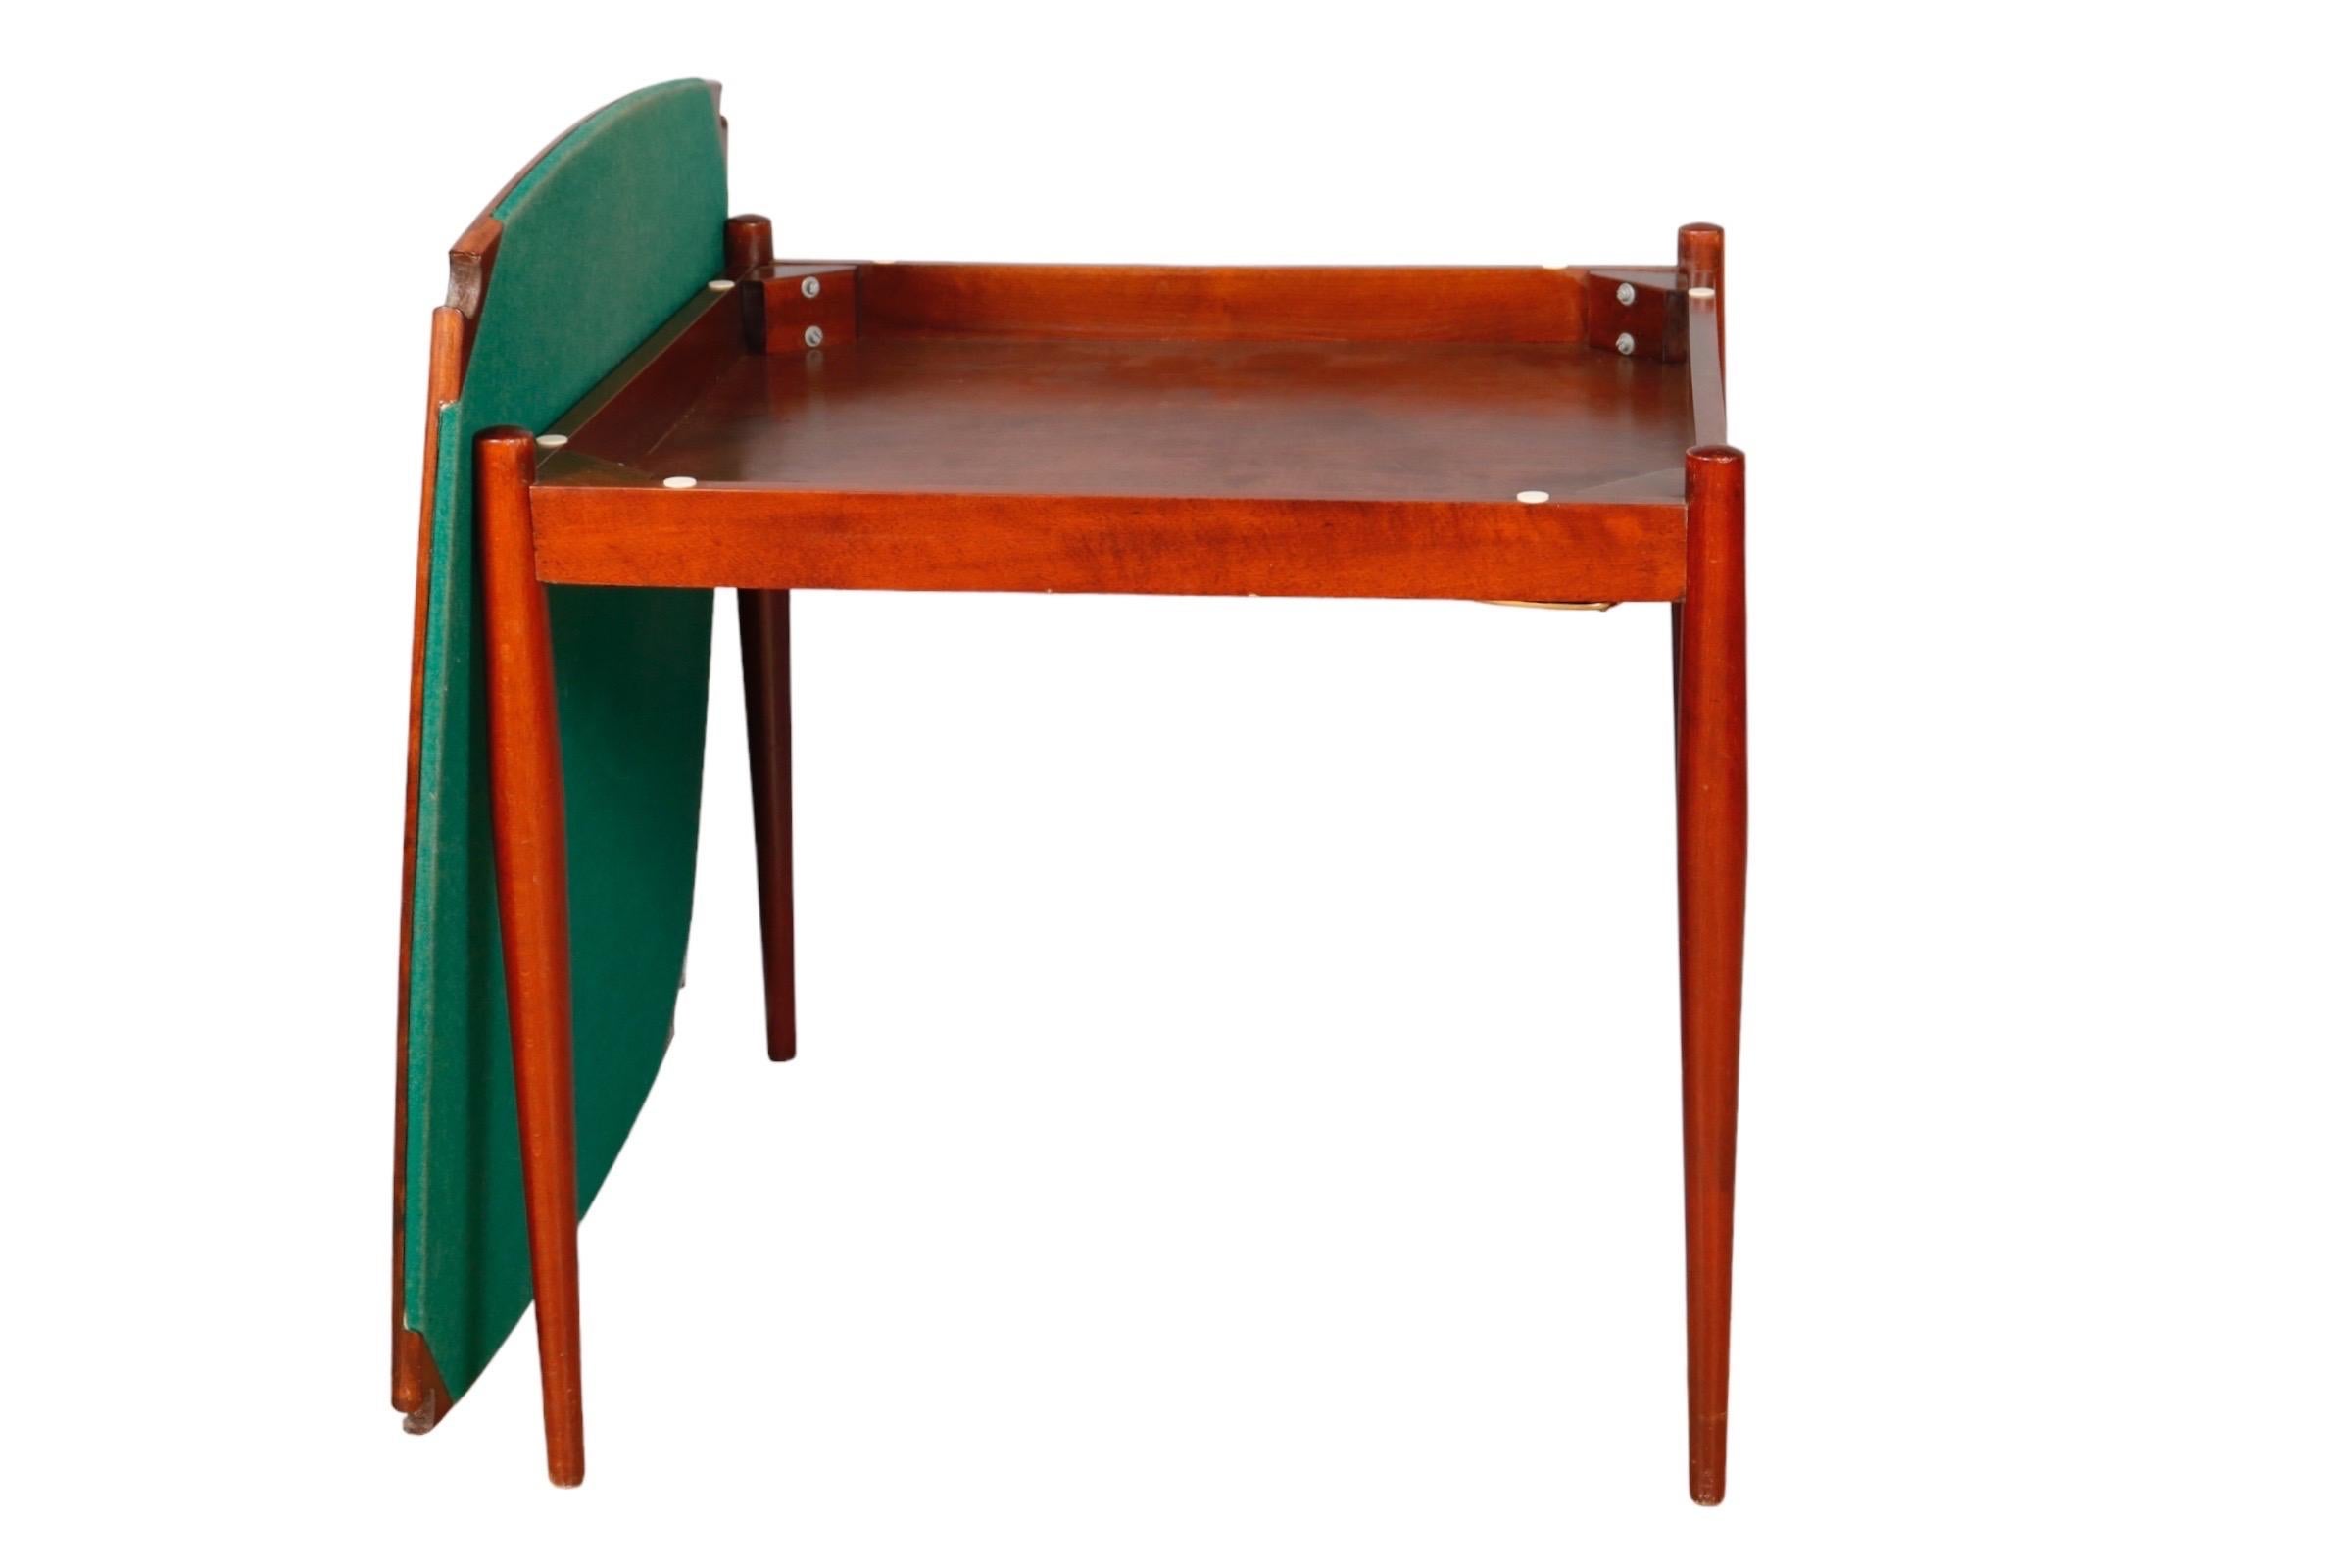 A Mid-Century Modern game table in teak, designed by Gio Ponti for Fratelli Reguitti. The table top is reversible with green felt cloth on one side. In the corners are hidden gold brass trays that rotate out.

Creator Gio Ponti
Manufacturer